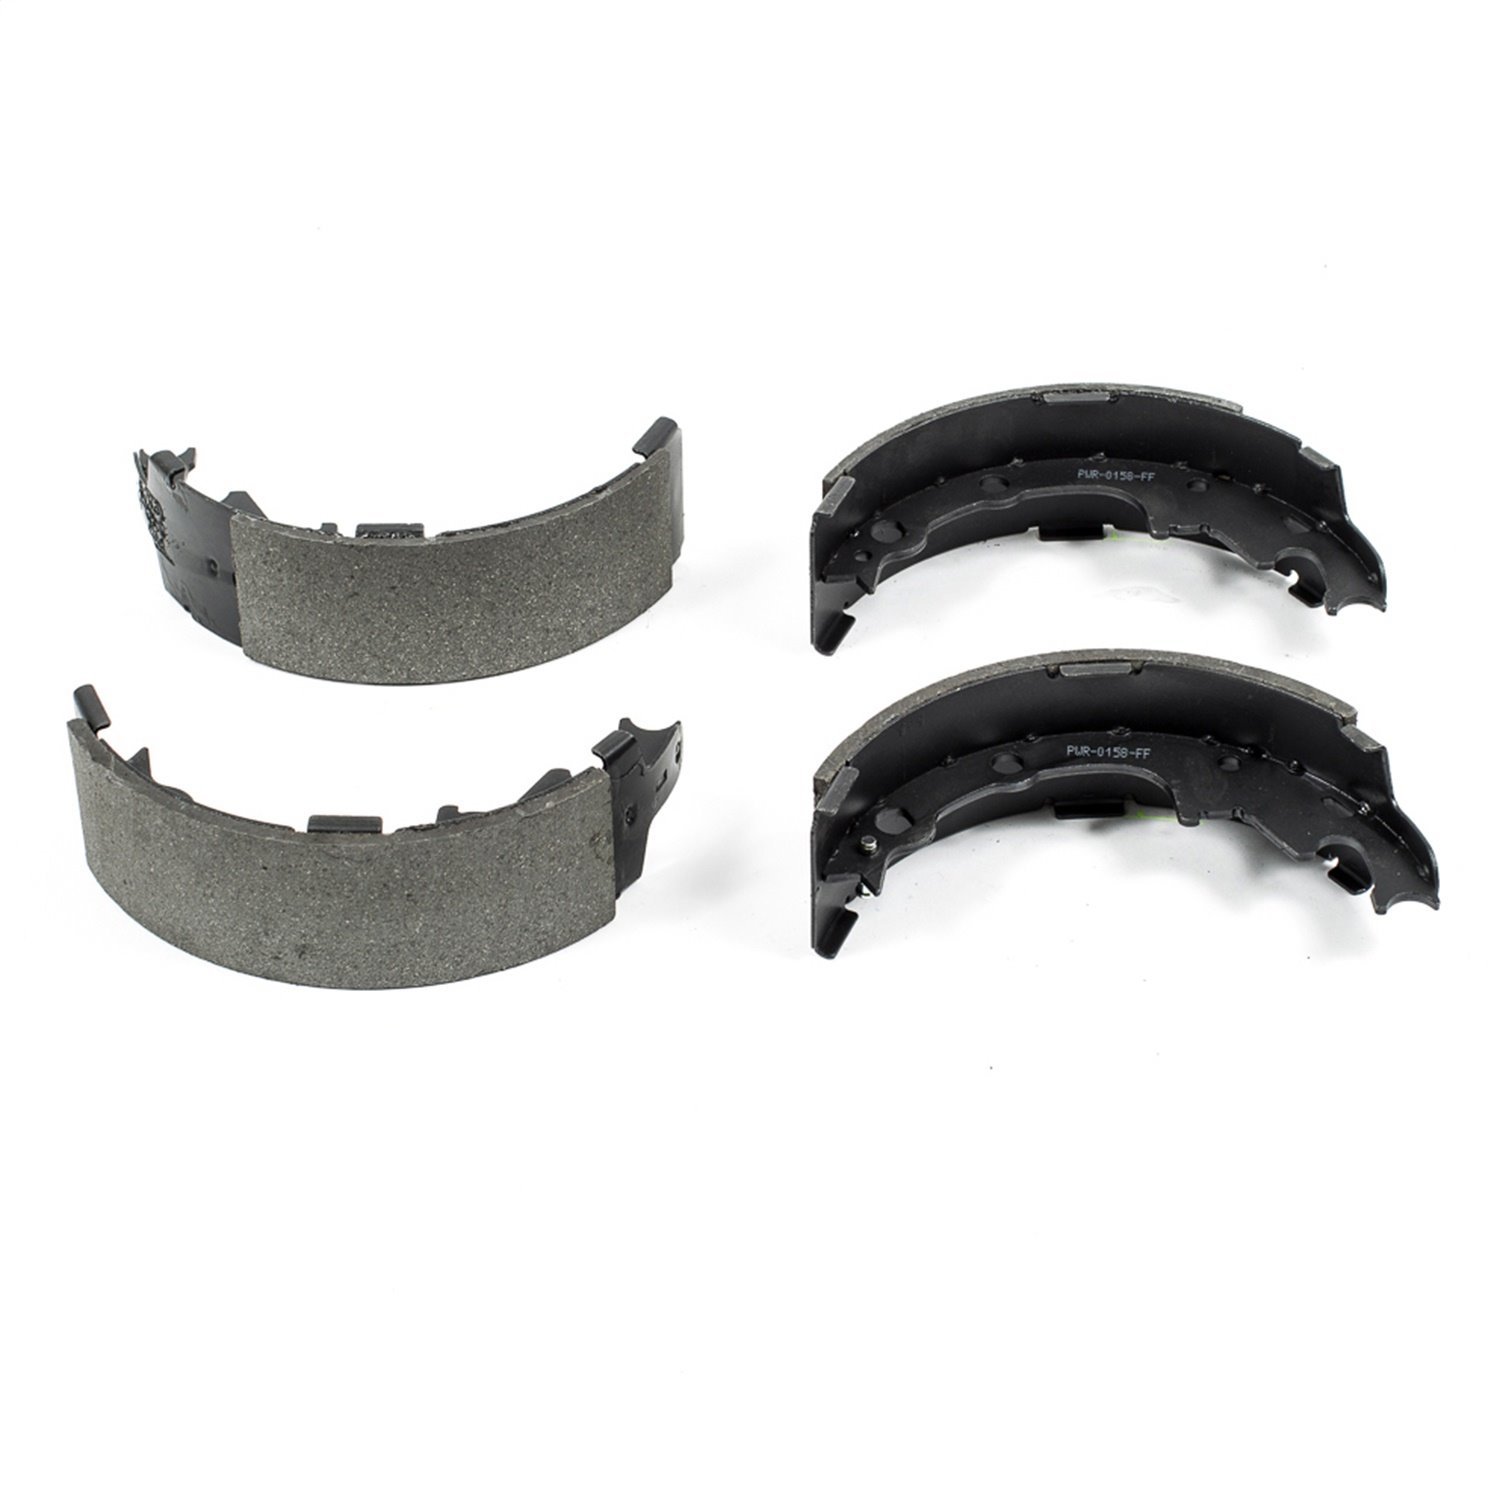 NEW SHOE B538 4 Rear 1991-90 CHRYSLER Town & Country/1995-92 CHRYSLER Town & Country/1995 DODGE Cara